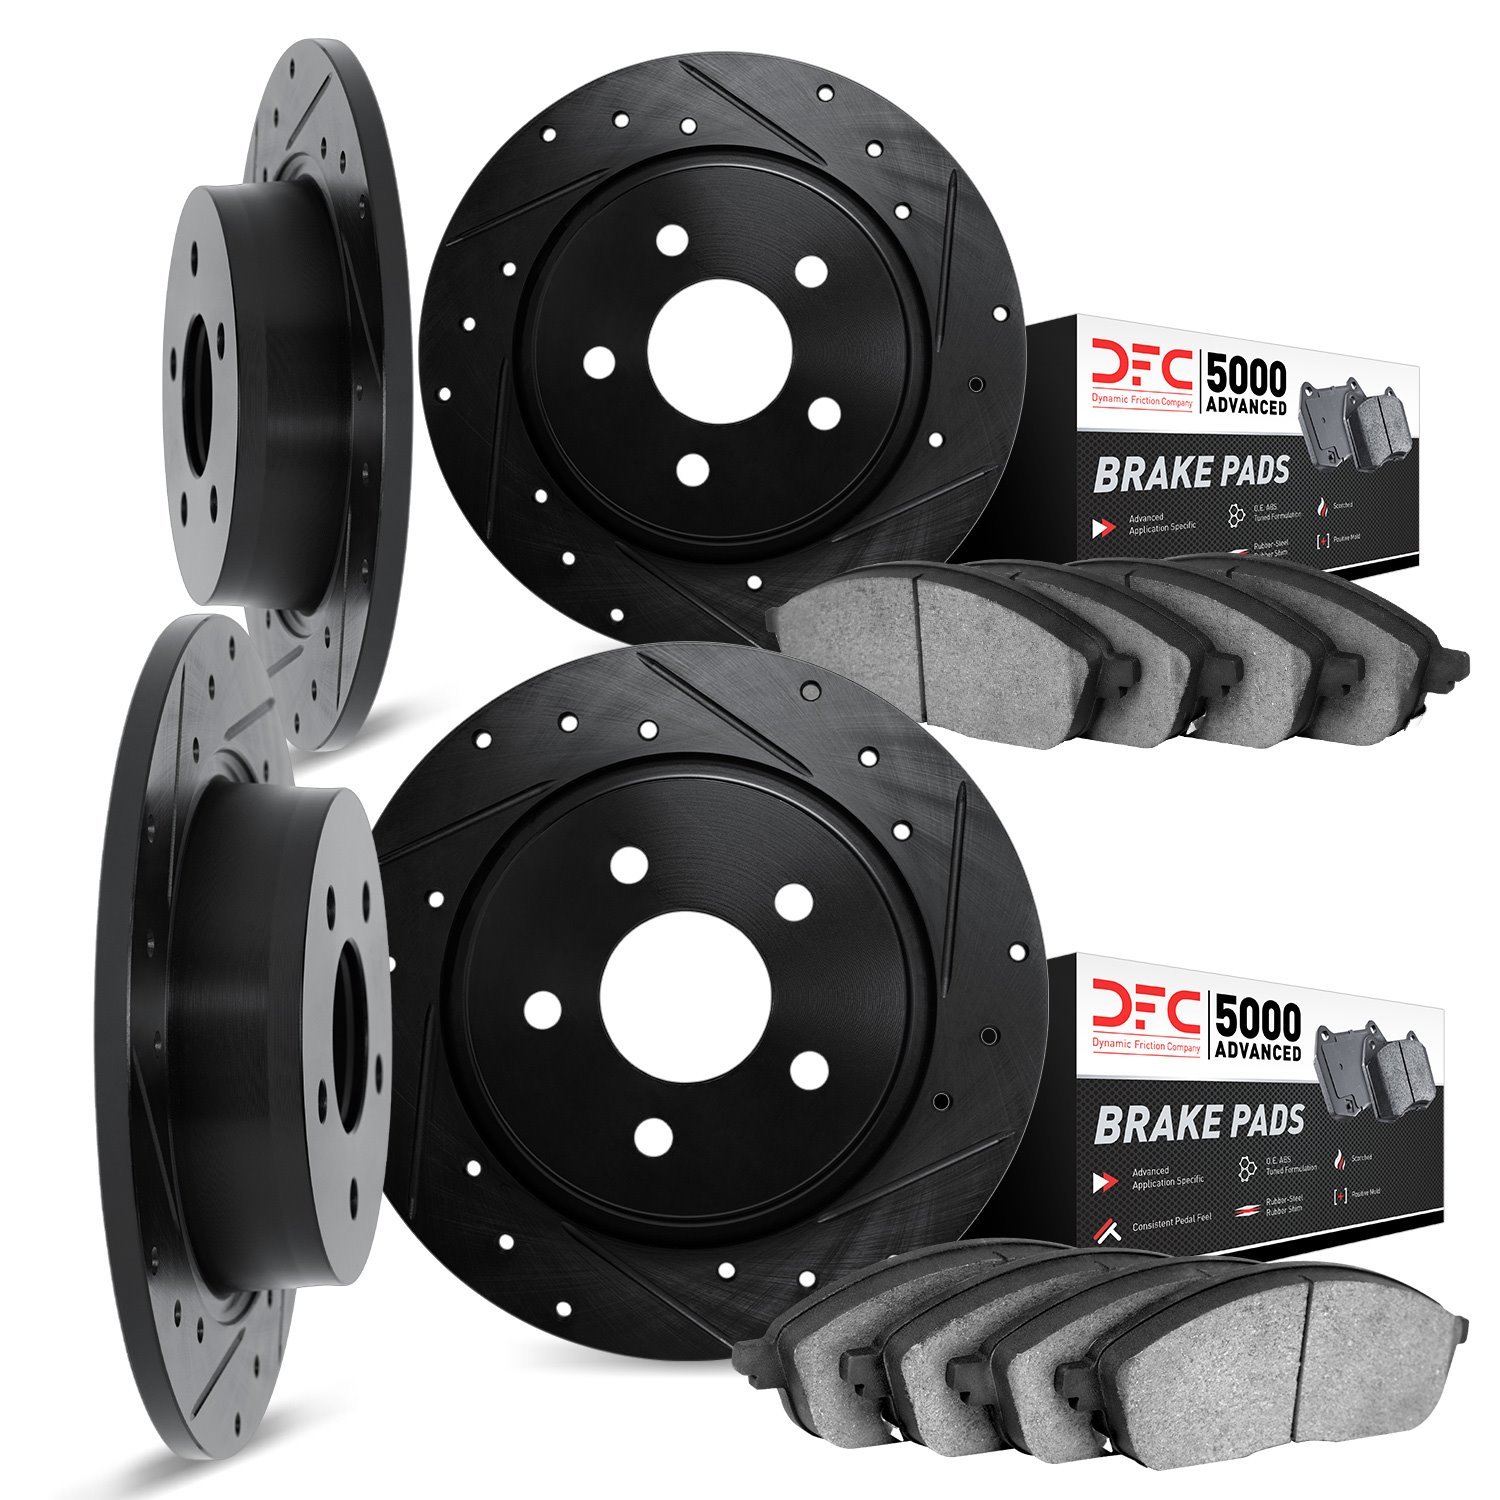 8504-52003 Drilled/Slotted Brake Rotors w/5000 Advanced Brake Pads Kit [Black], 1984-1987 GM, Position: Front and Rear